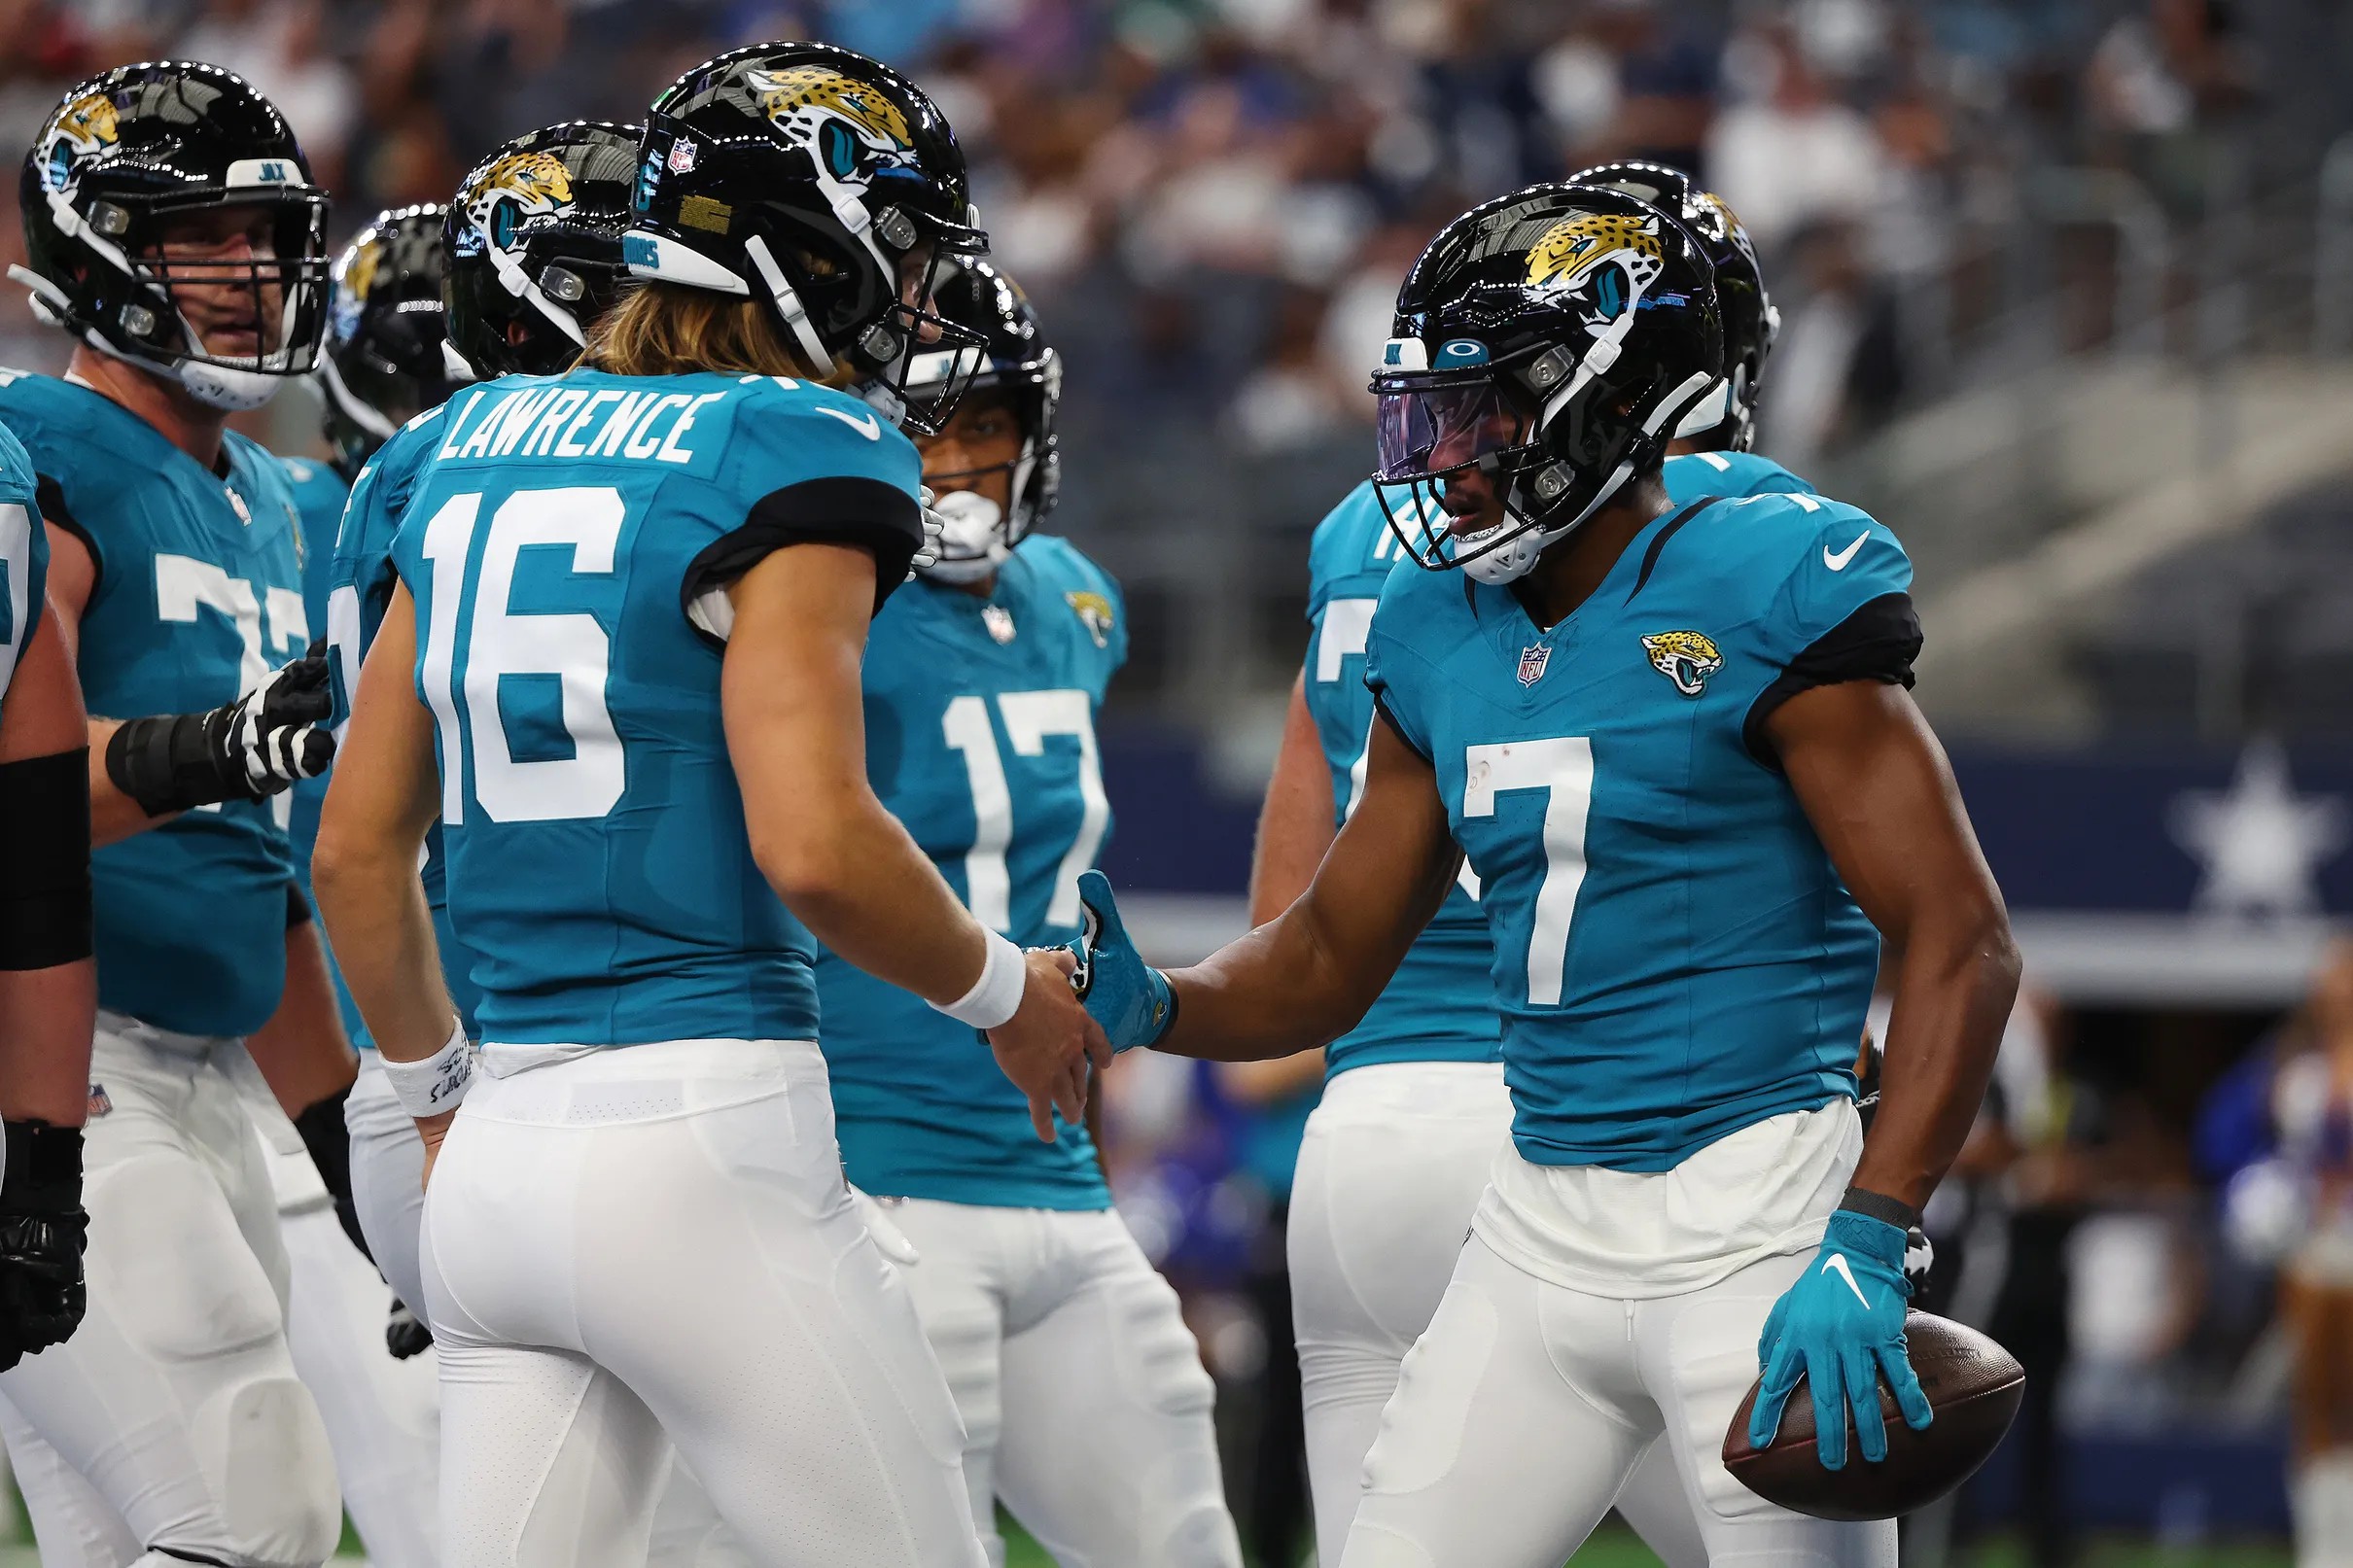 Jaguars vs. Lions: How to watch, game time, TV schedule, streaming